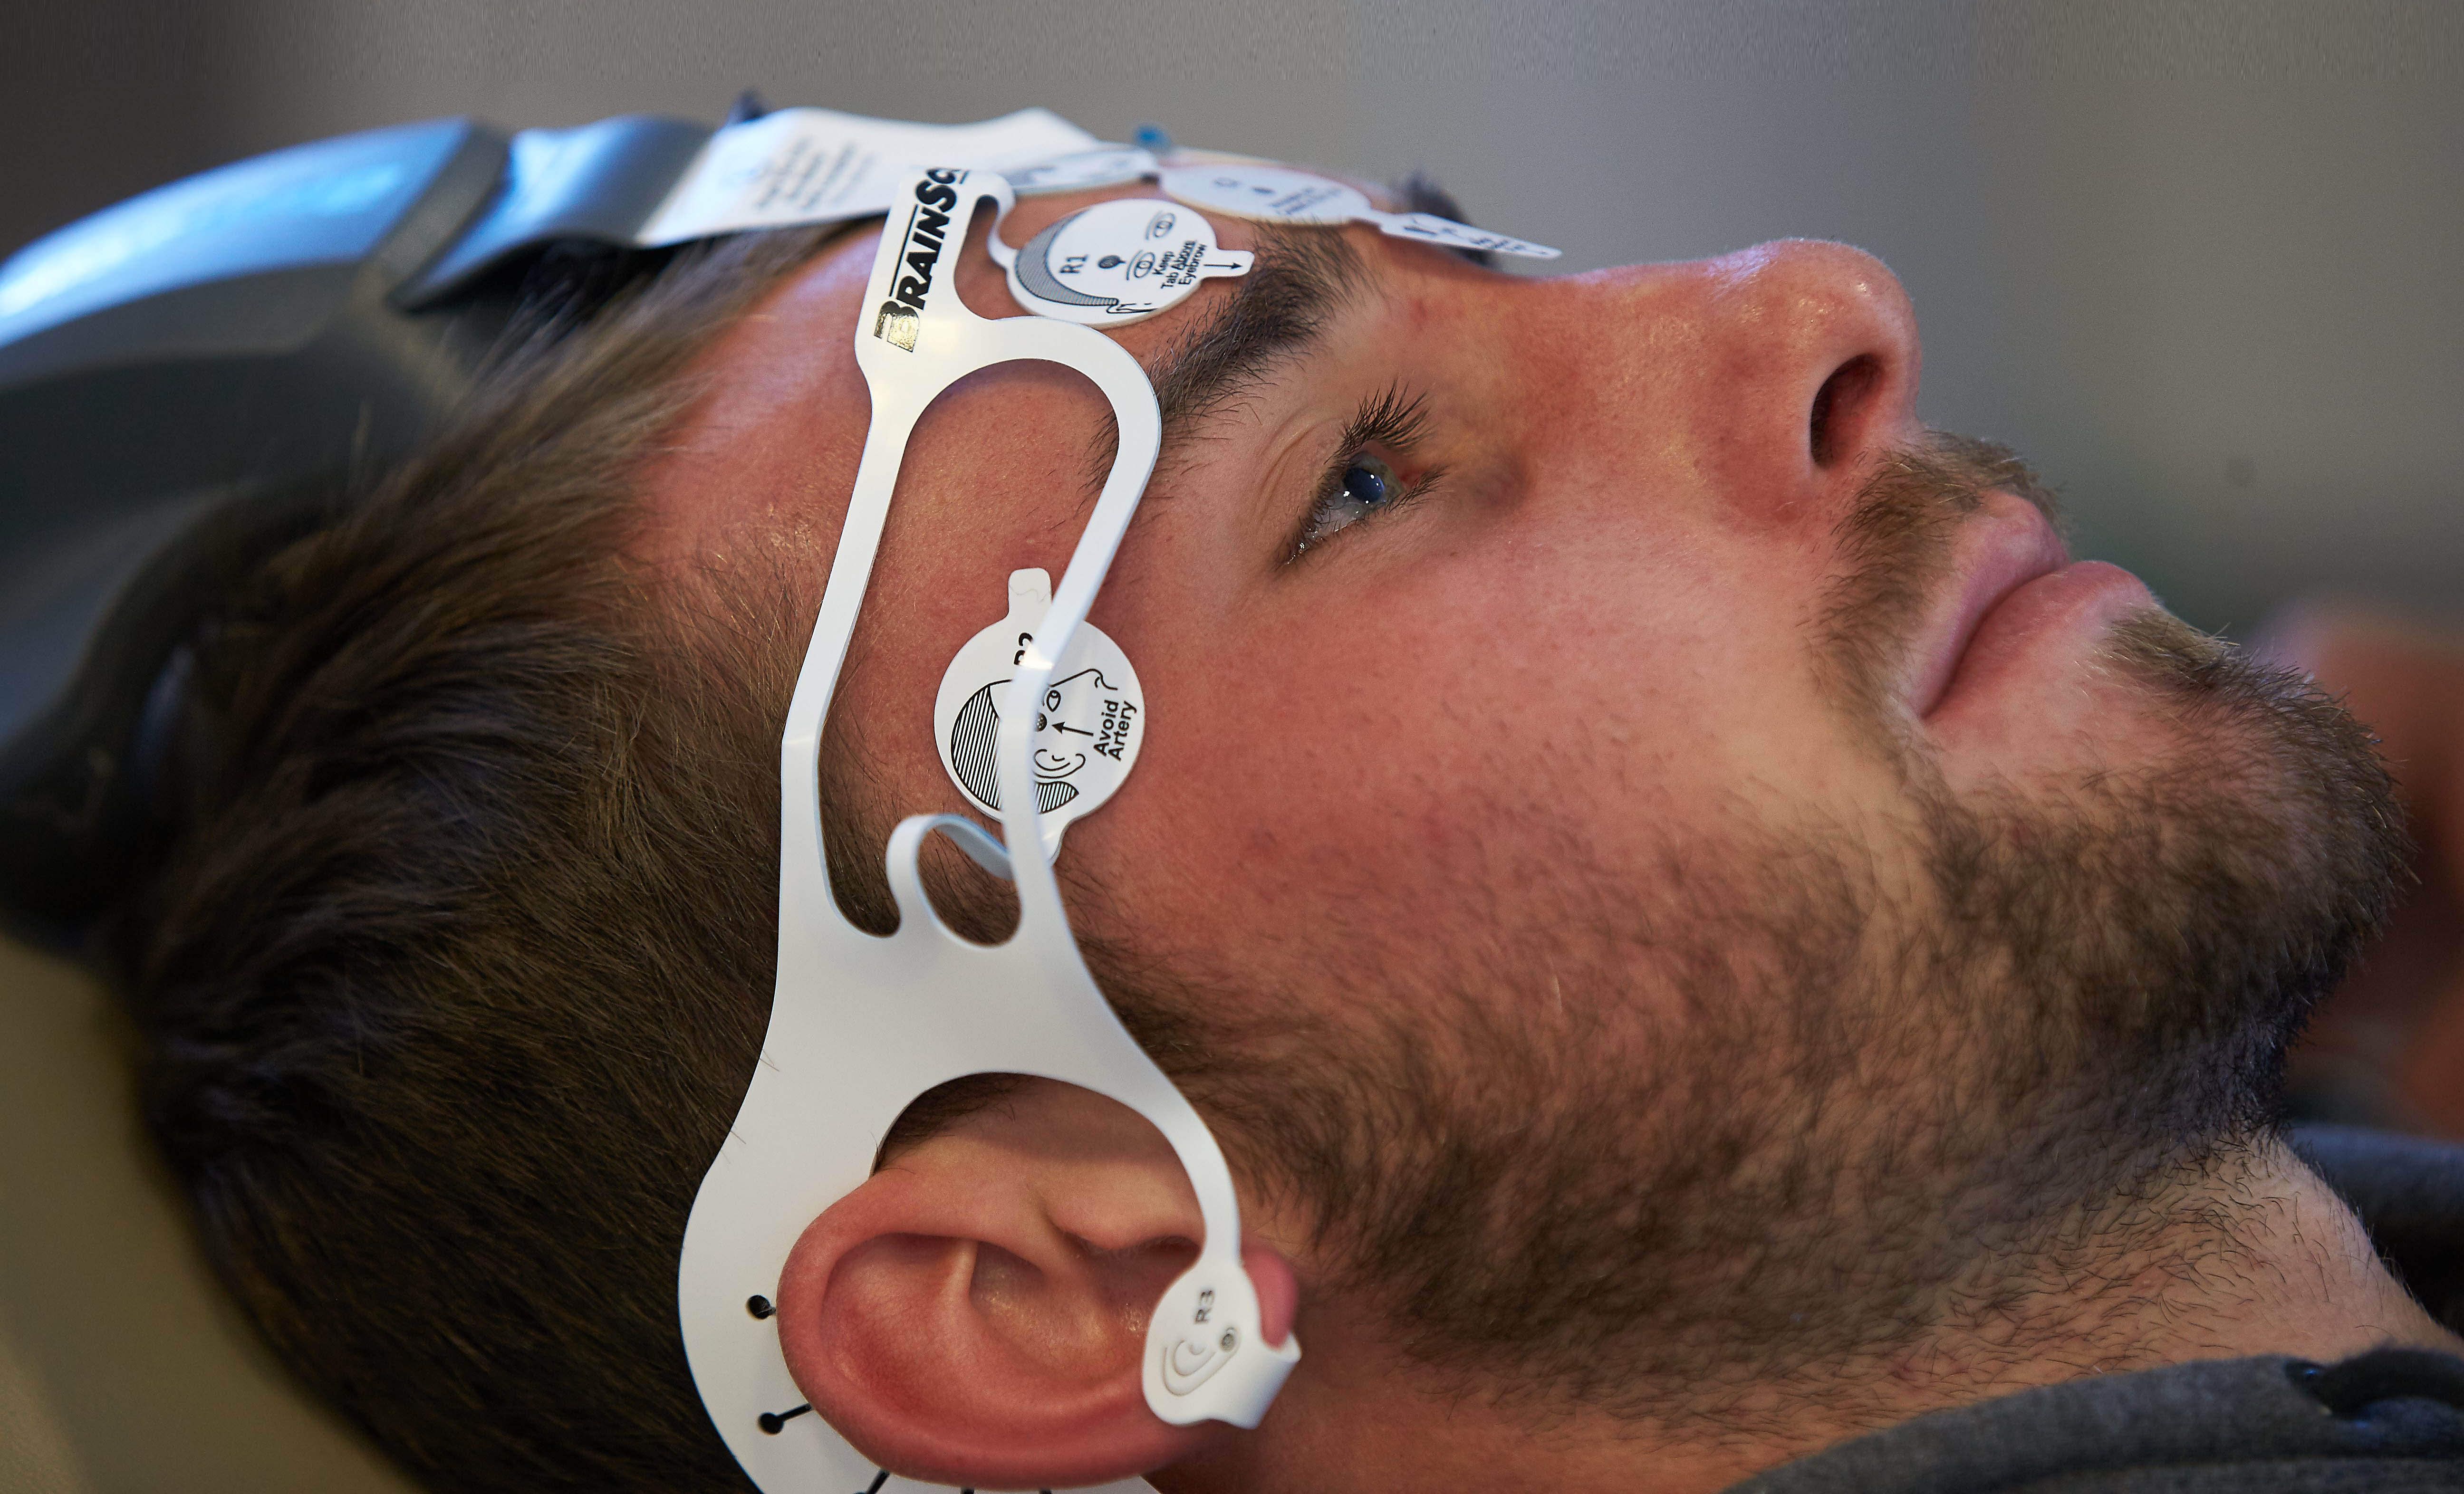 Kenneth Slack, a student athlete on the Le Moyne College soccer team, is part of a control group for a study of concussion at Upstate Medical University. (PHOTOS BY CHUCK WAINWRIGHT)